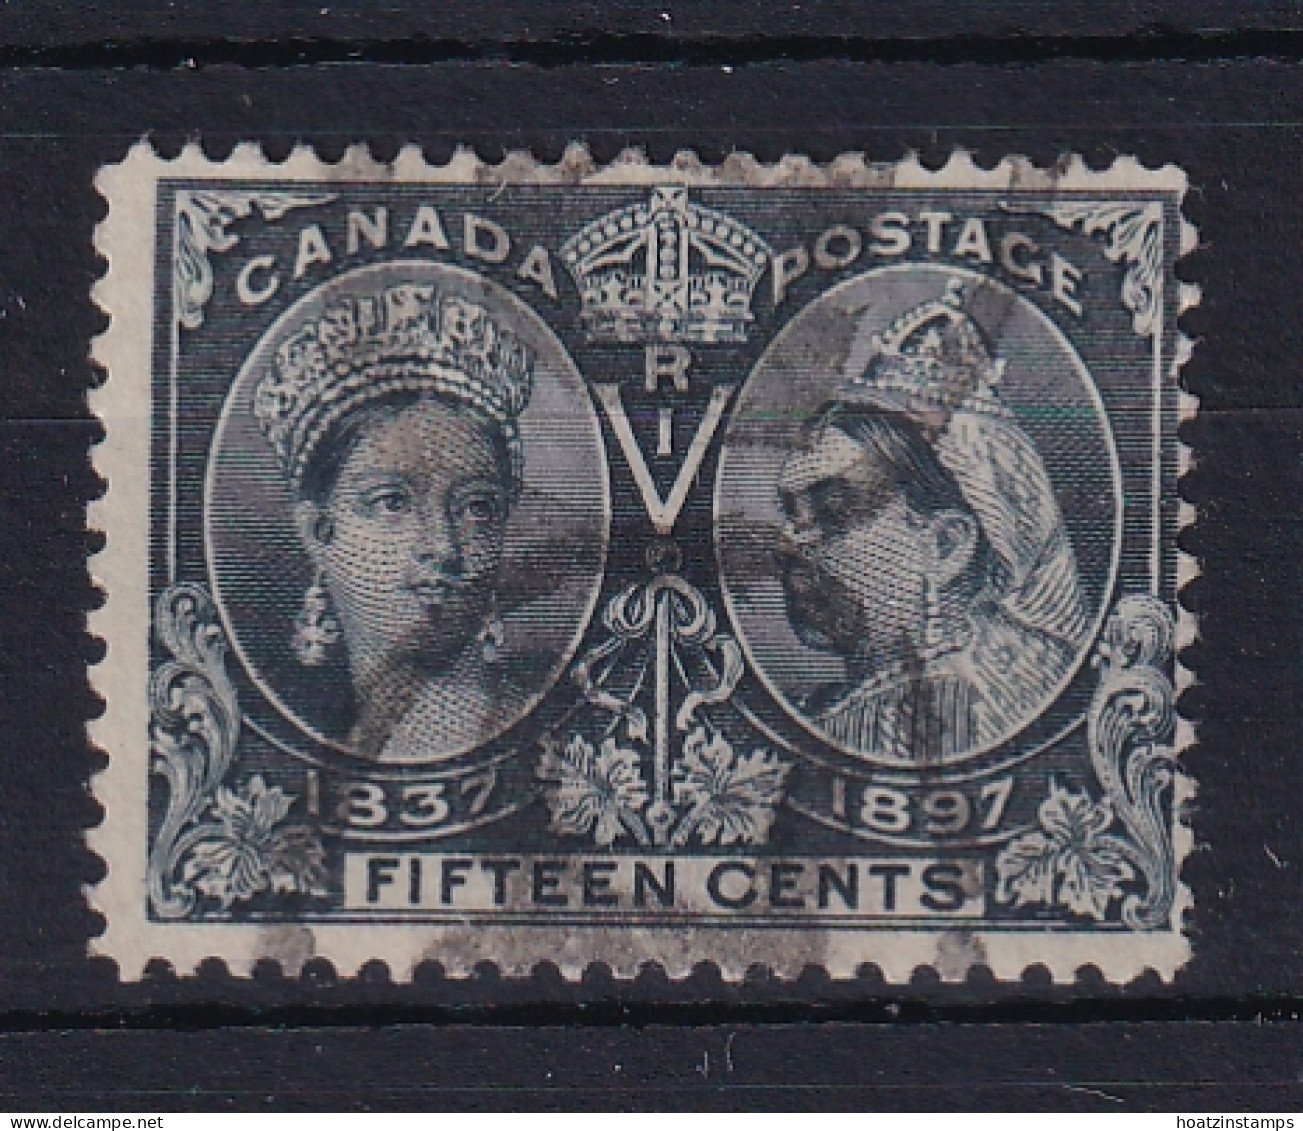 Canada: 1897   QV - Double Head   SG132    15c      Used - Used Stamps